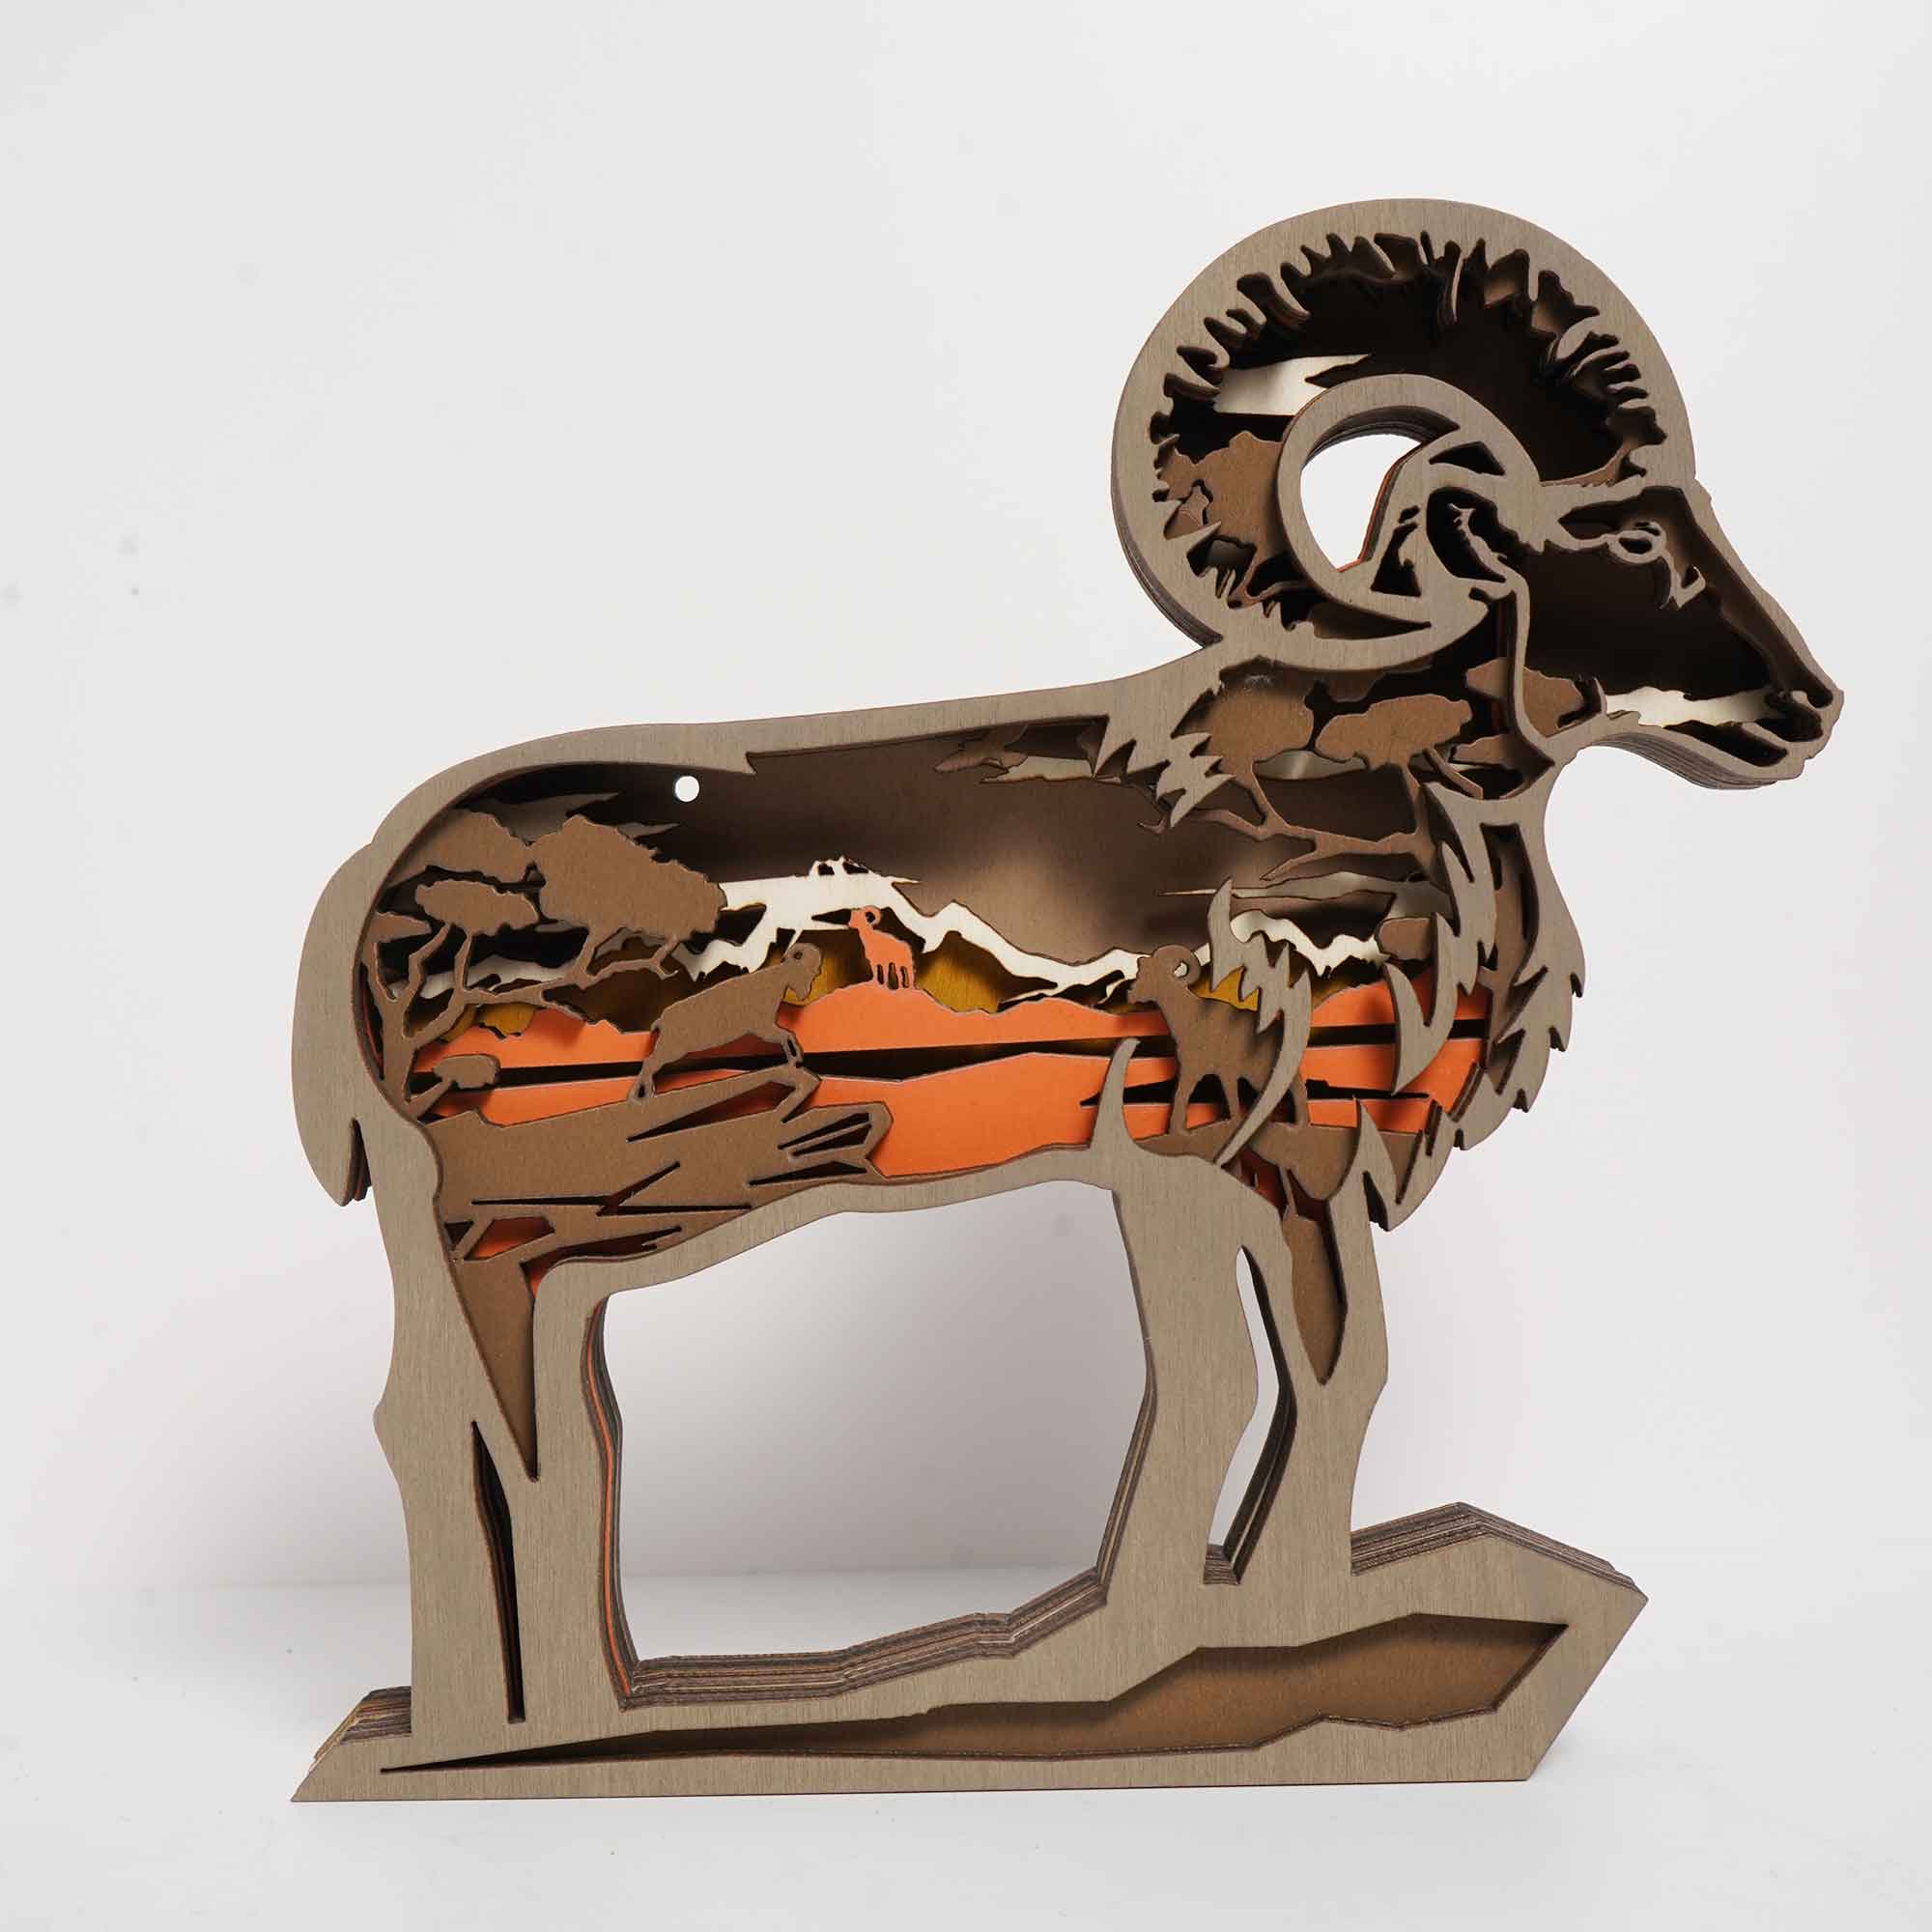 New Arrivals✨-Bighorn Sheep Carving Handcraft Gift